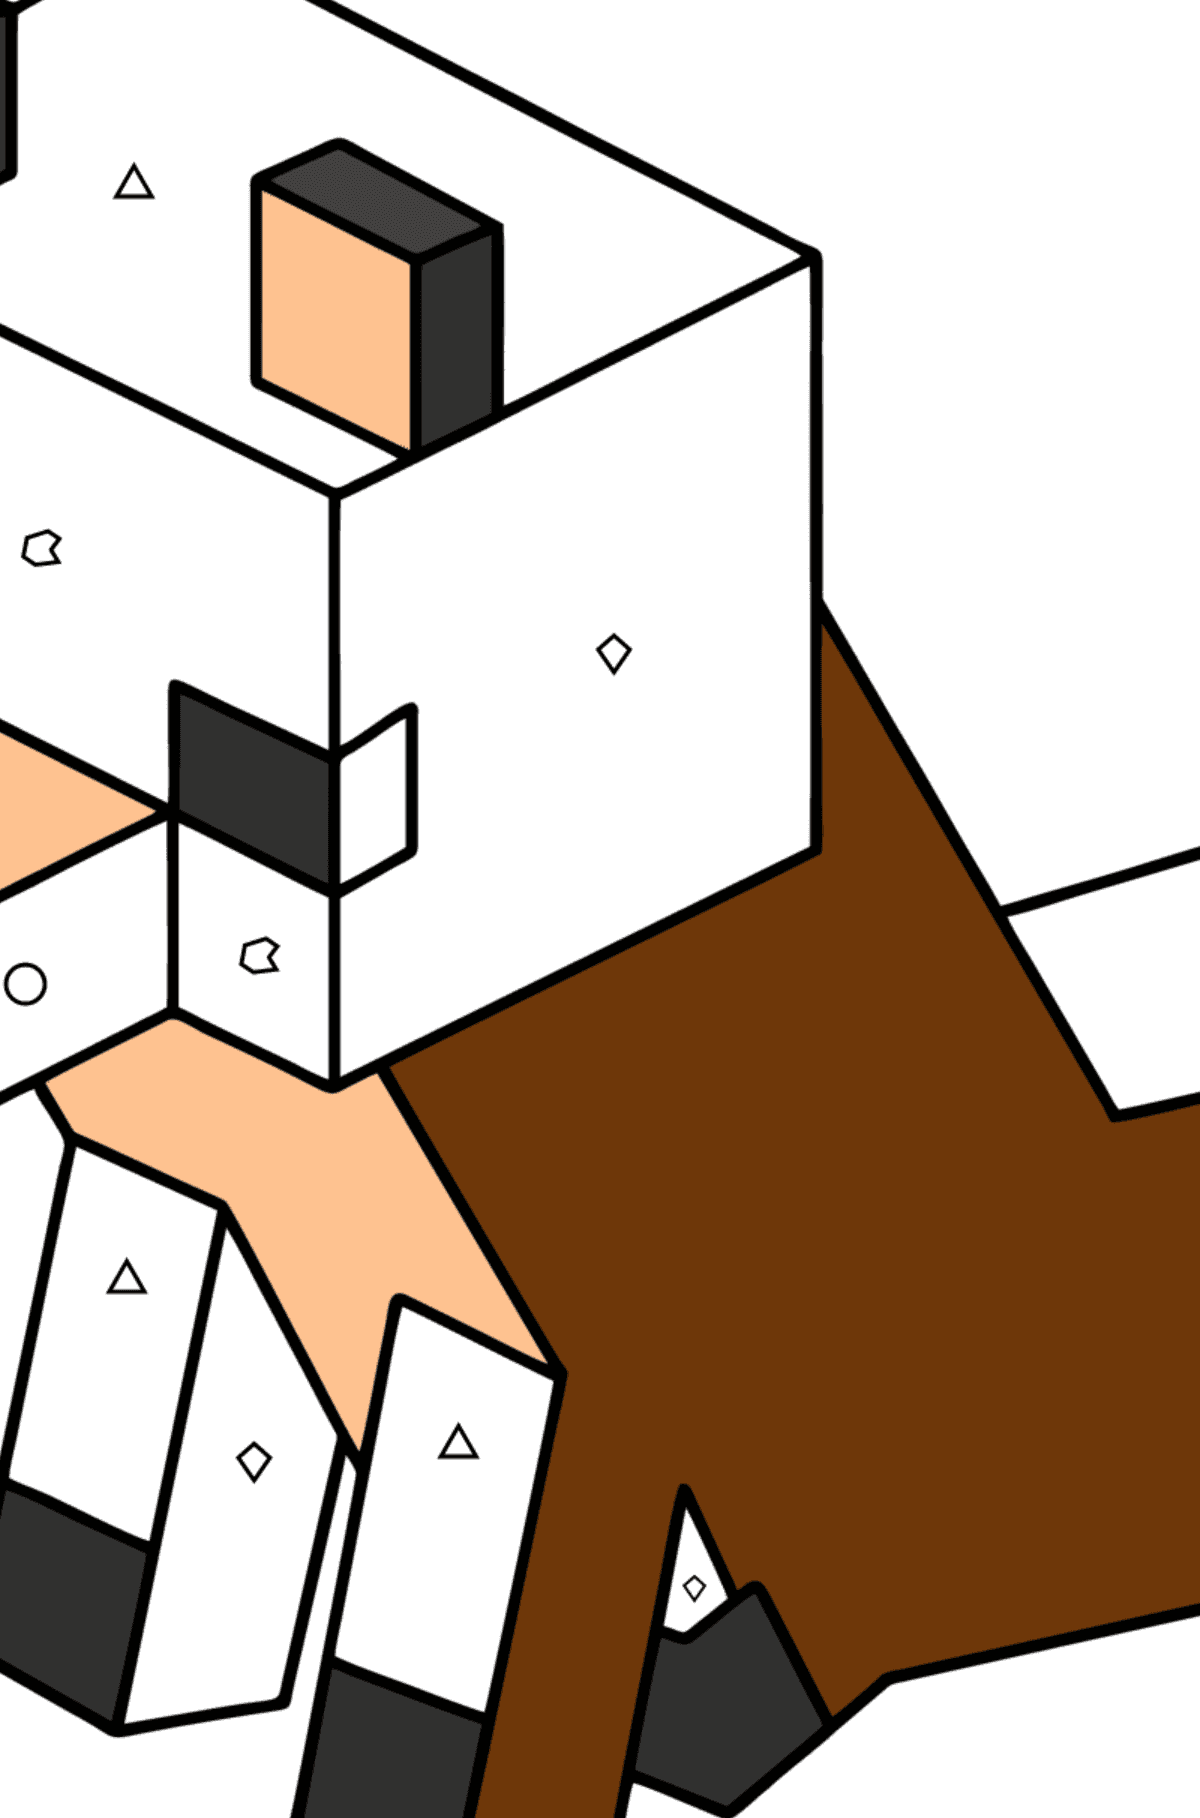 Minecraft Fox coloring page - Coloring by Geometric Shapes for Kids